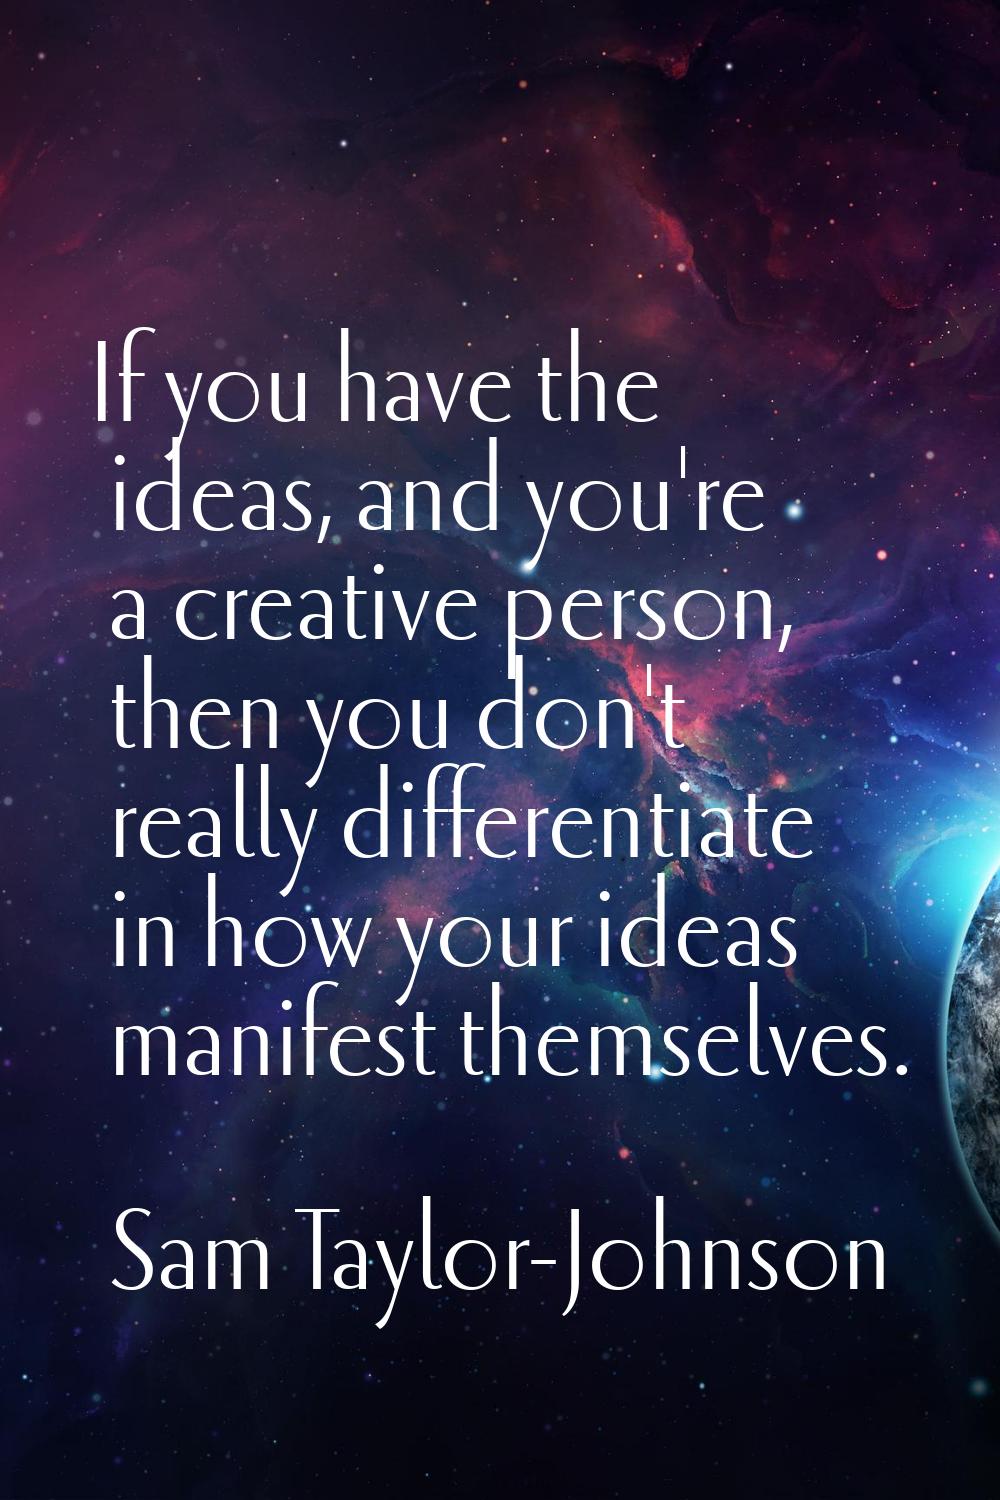 If you have the ideas, and you're a creative person, then you don't really differentiate in how you